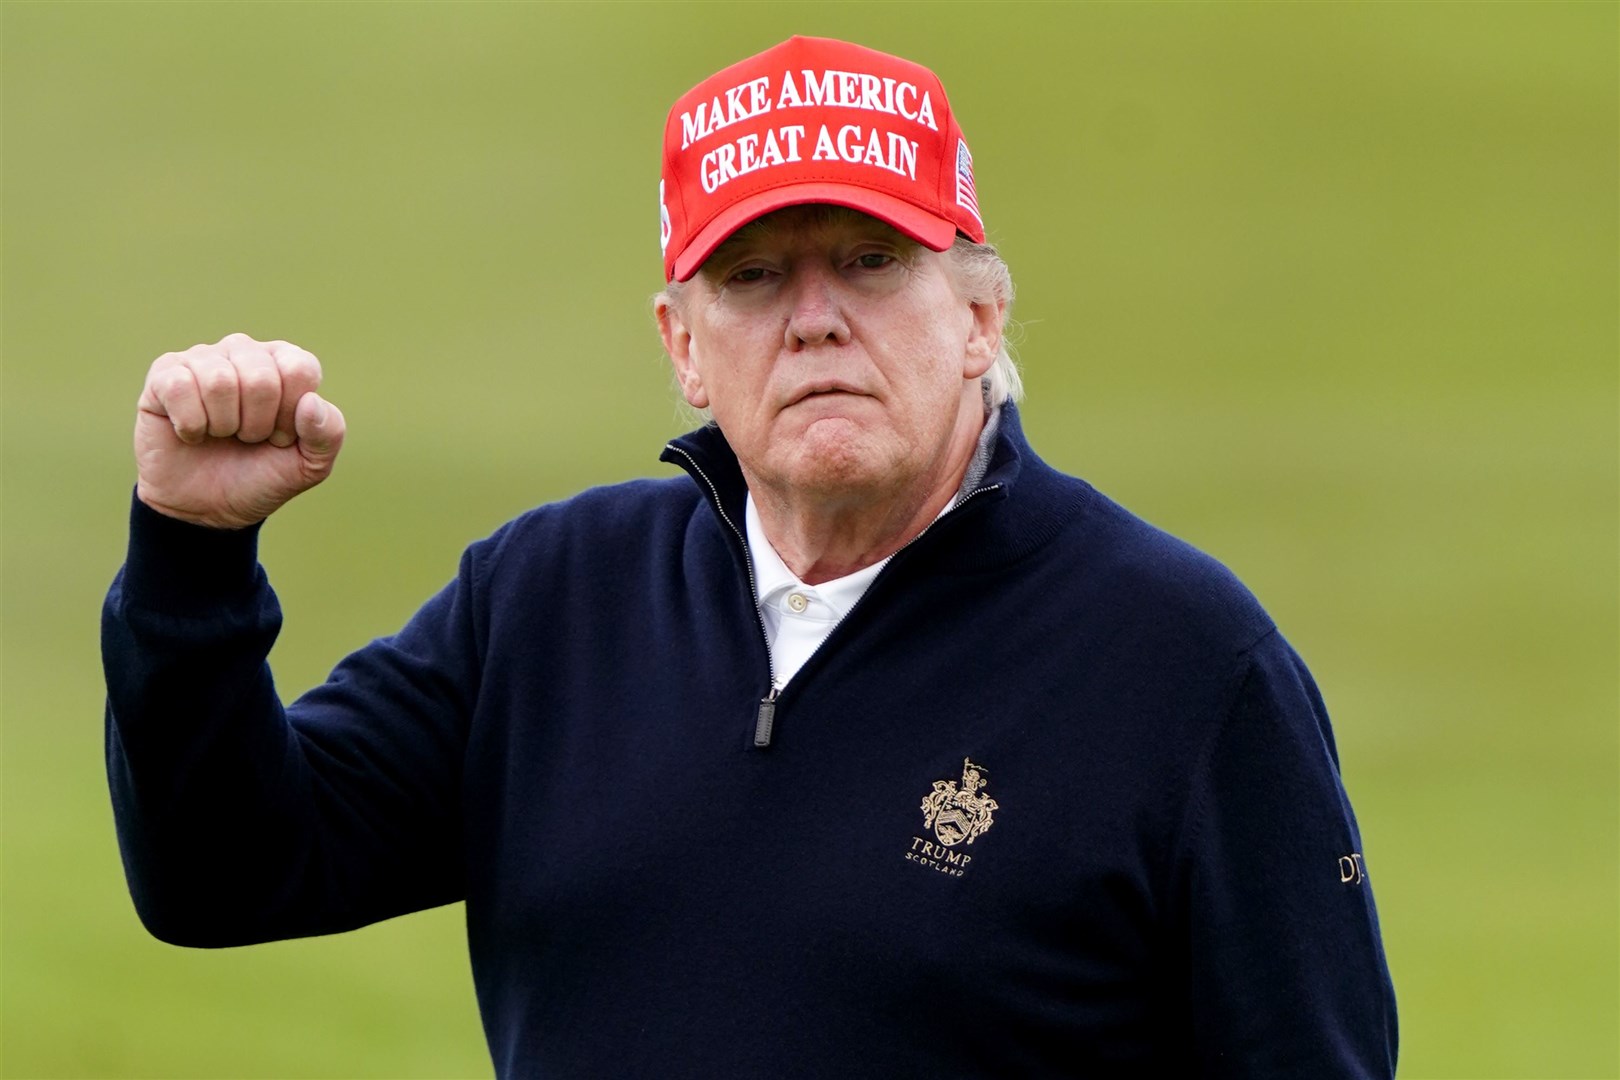 Former US president Donald Trump playing golf at Turnberry golf course during a visit to the UK (Jane Barlow/PA)